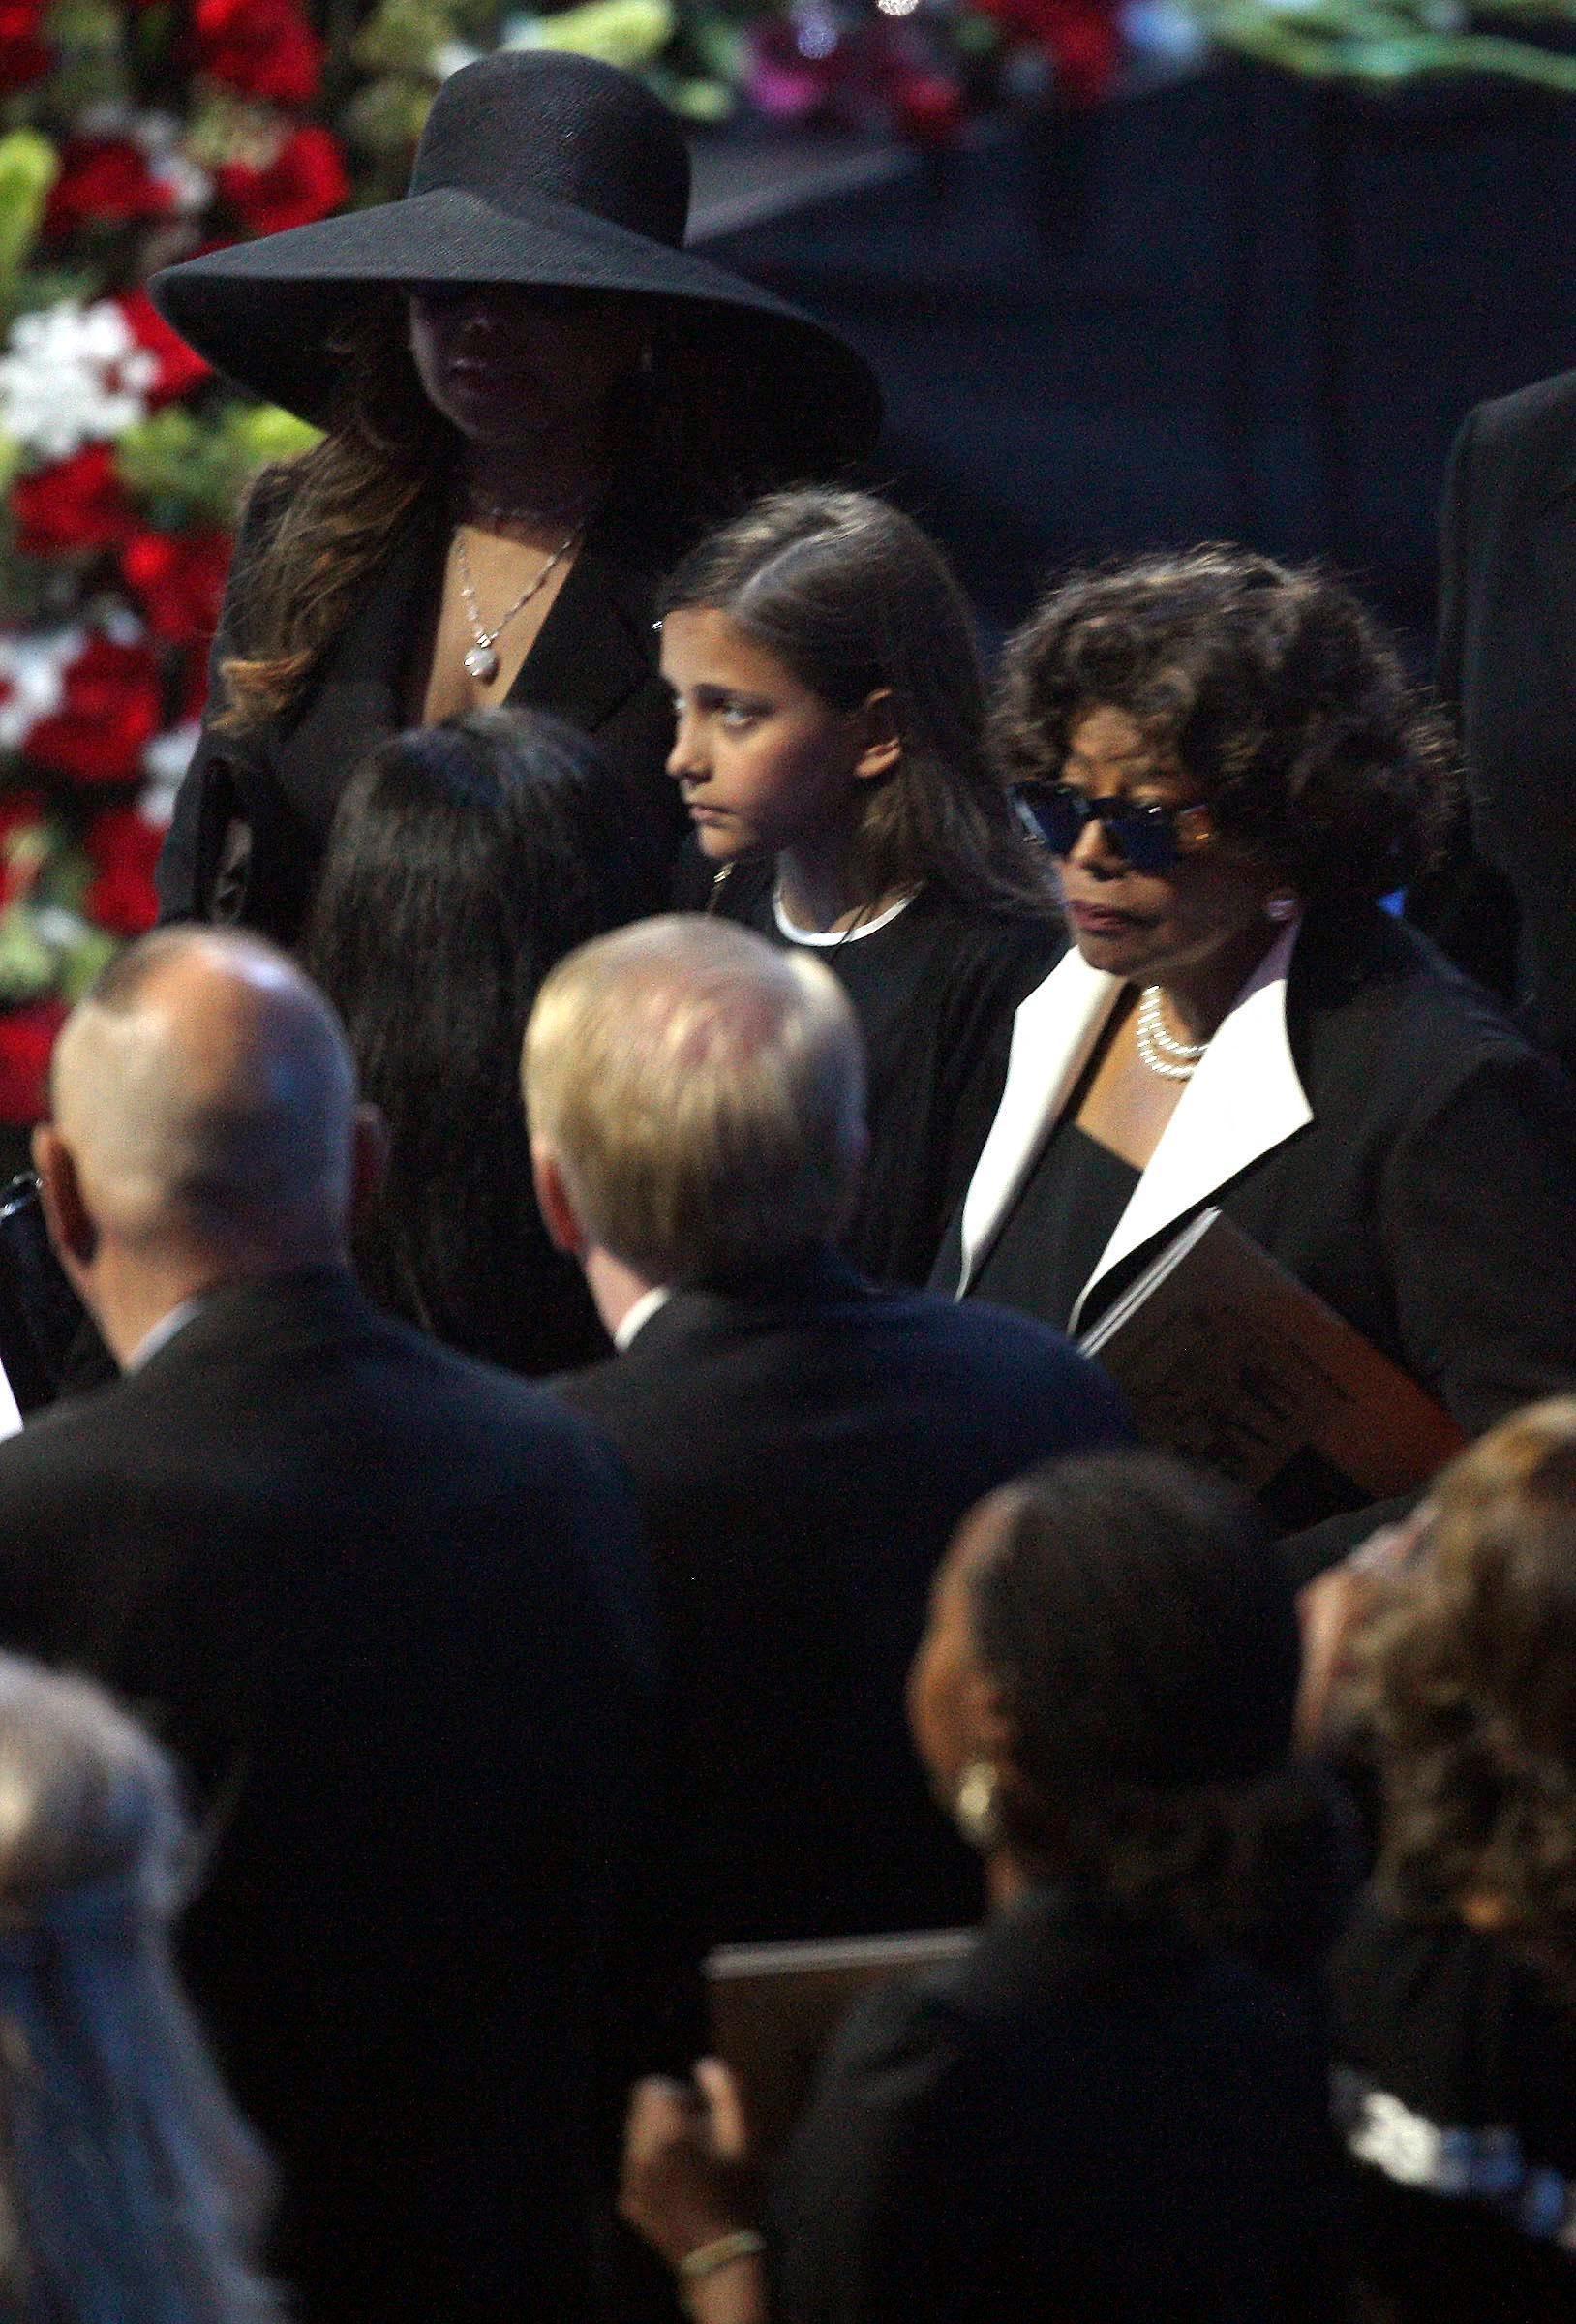 Katherine Jackson arrives with Michael Jackson's daughter, Paris (C) for the memorial services for pop star Michael Jackson in Los Angeles July 7, 2009